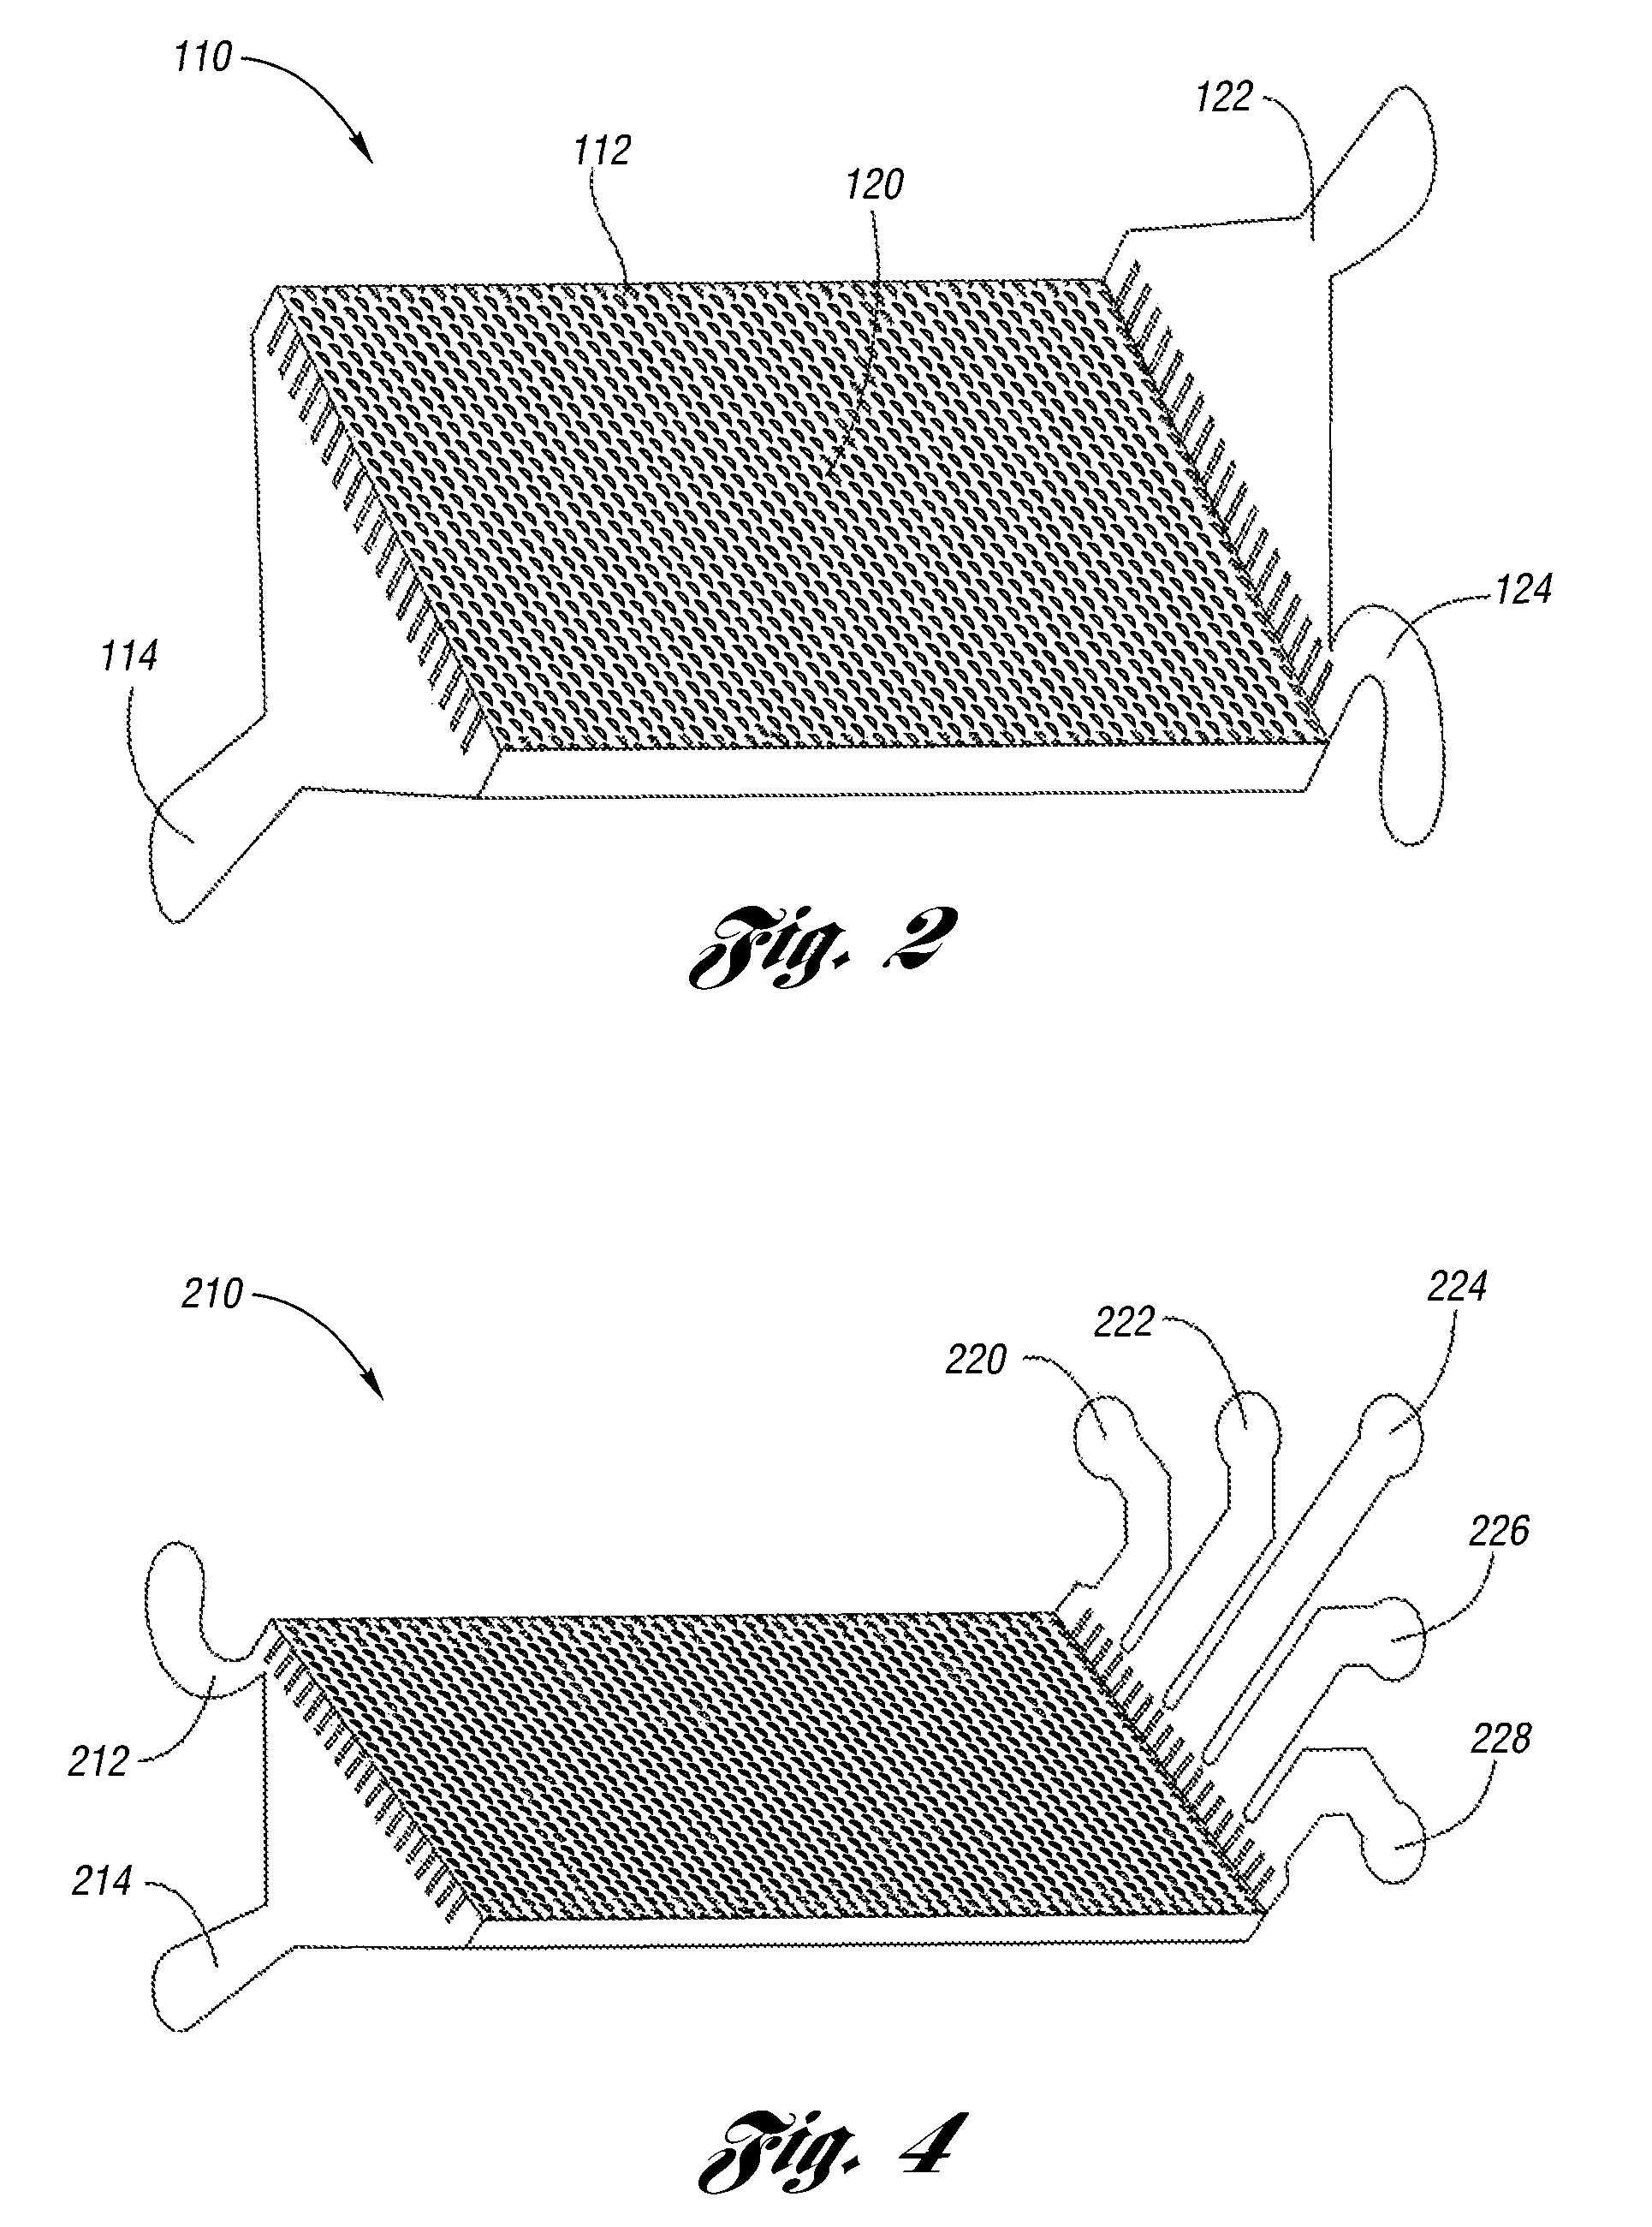 Device for separating and concentrating microfluidic particles